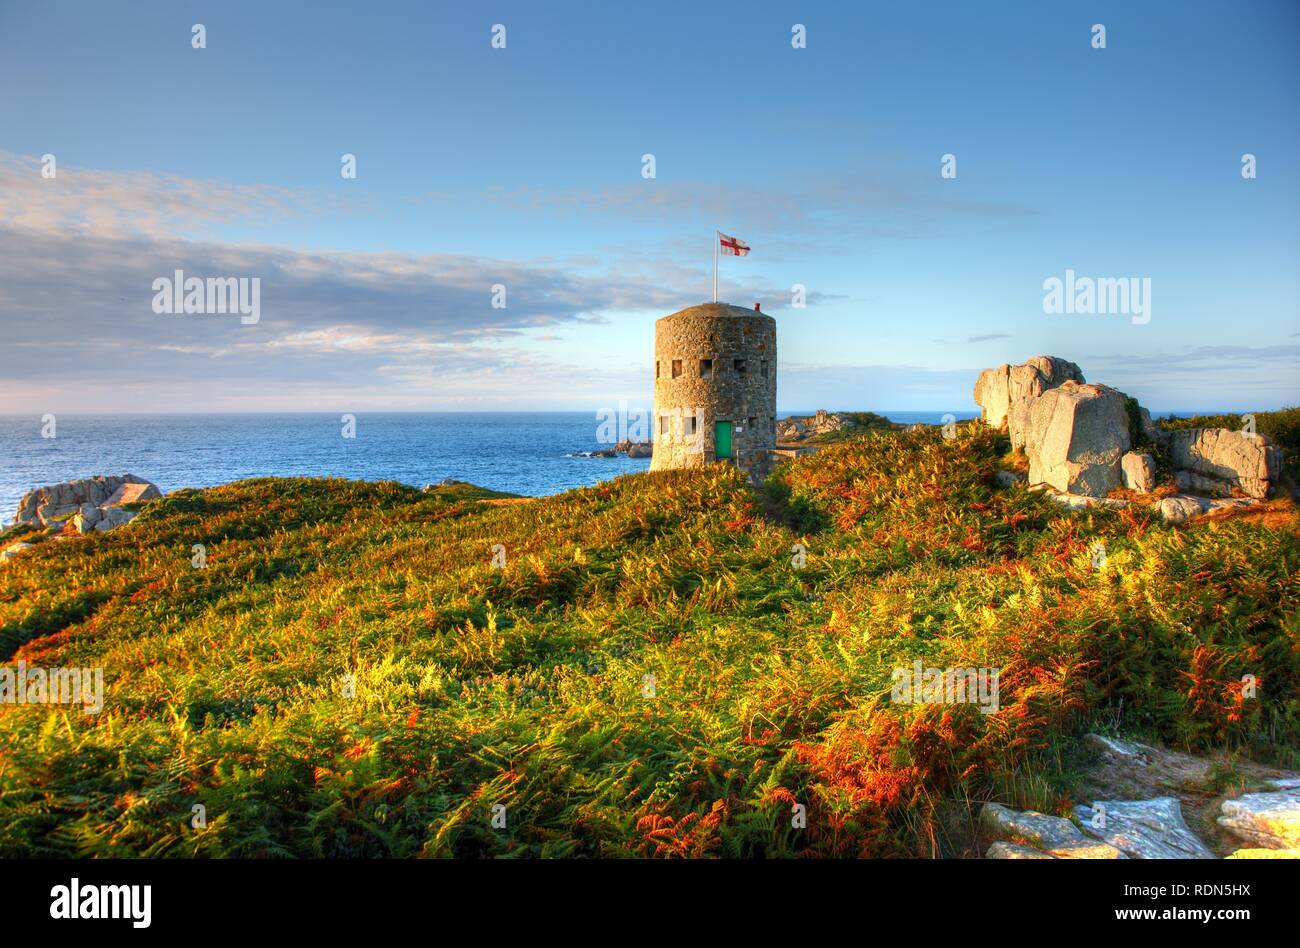 Martello towers, watch towers and fortified towers built in the 17th century, situated along the coastline, here tower number 5 Stock Photo